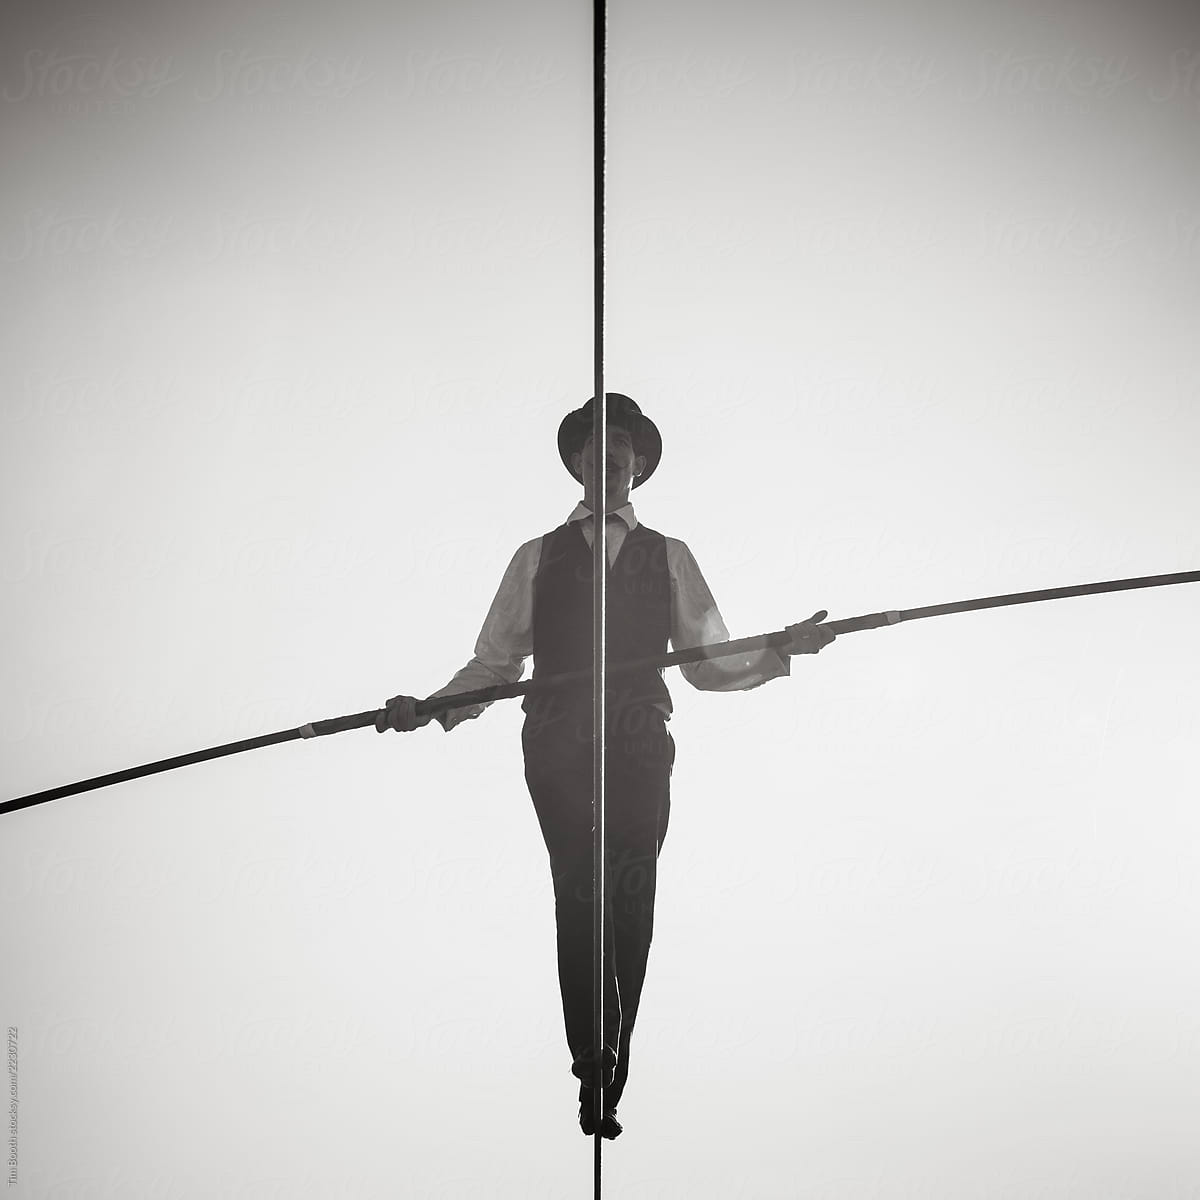 A Monochrome Image Of A Tightrope Walker by Stocksy Contributor Tim  Booth - Stocksy